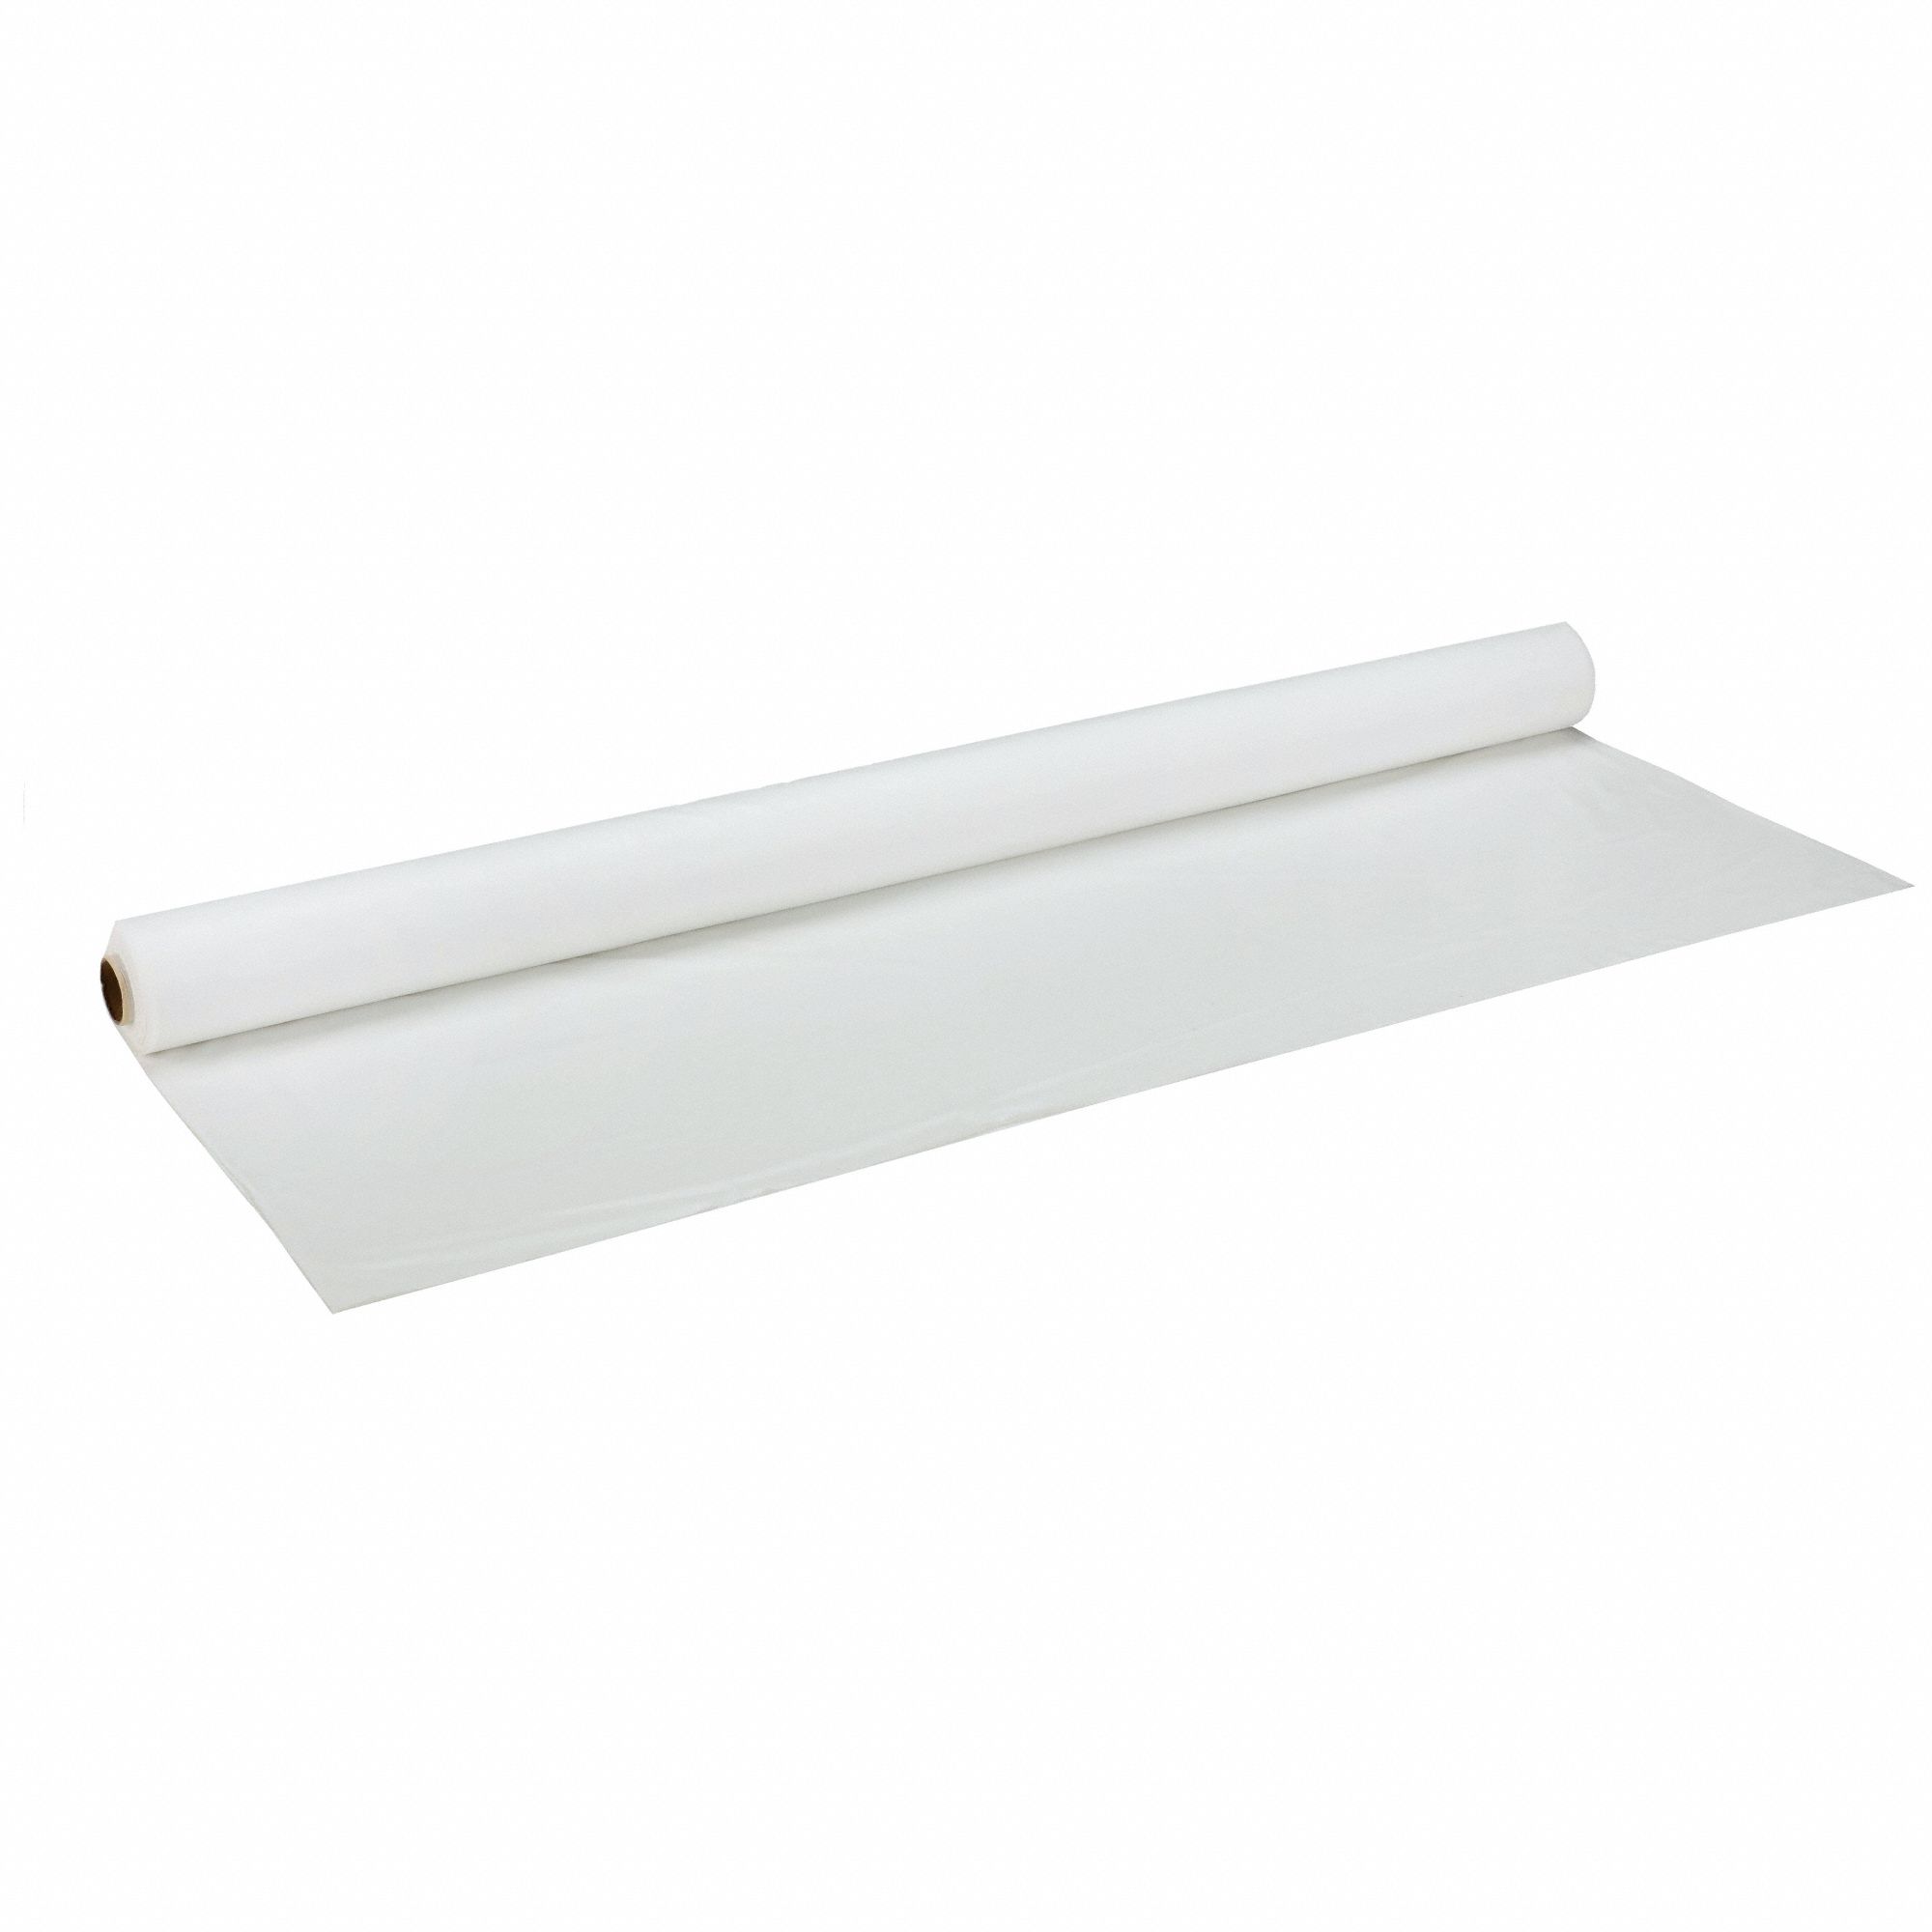 Hoffmaster 114000 40 x 300' White Plastic Table Cover Roll